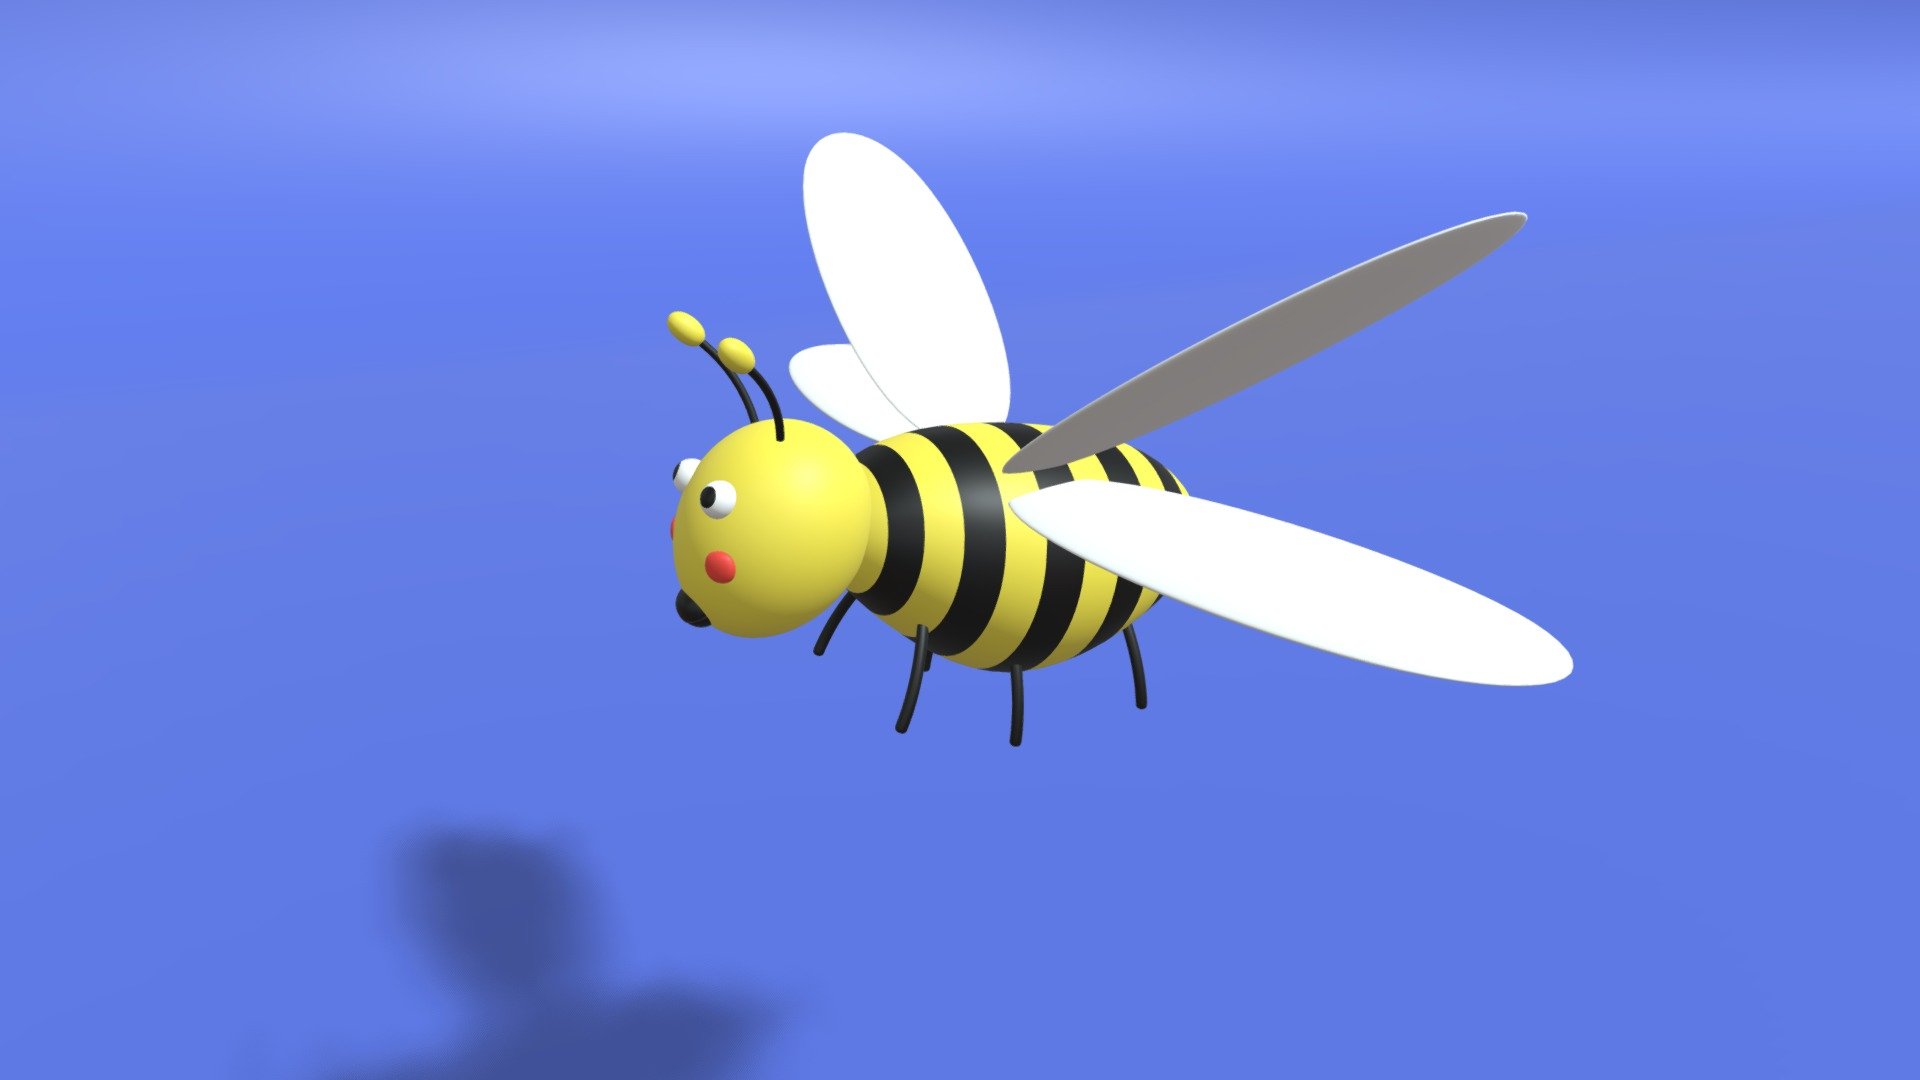 -Cute Cartoon Bee.

-This product contains 20 objects.

-Total vert: 17,209 poly: 17,042.

-Materials have the correct names.

-This product was created in Blender 2.8.

-Formats: blend, fbx, obj, c4d, dae, abc, stl, u4d glb, unity.

-We hope you enjoy this model.

-Thank you 3d model